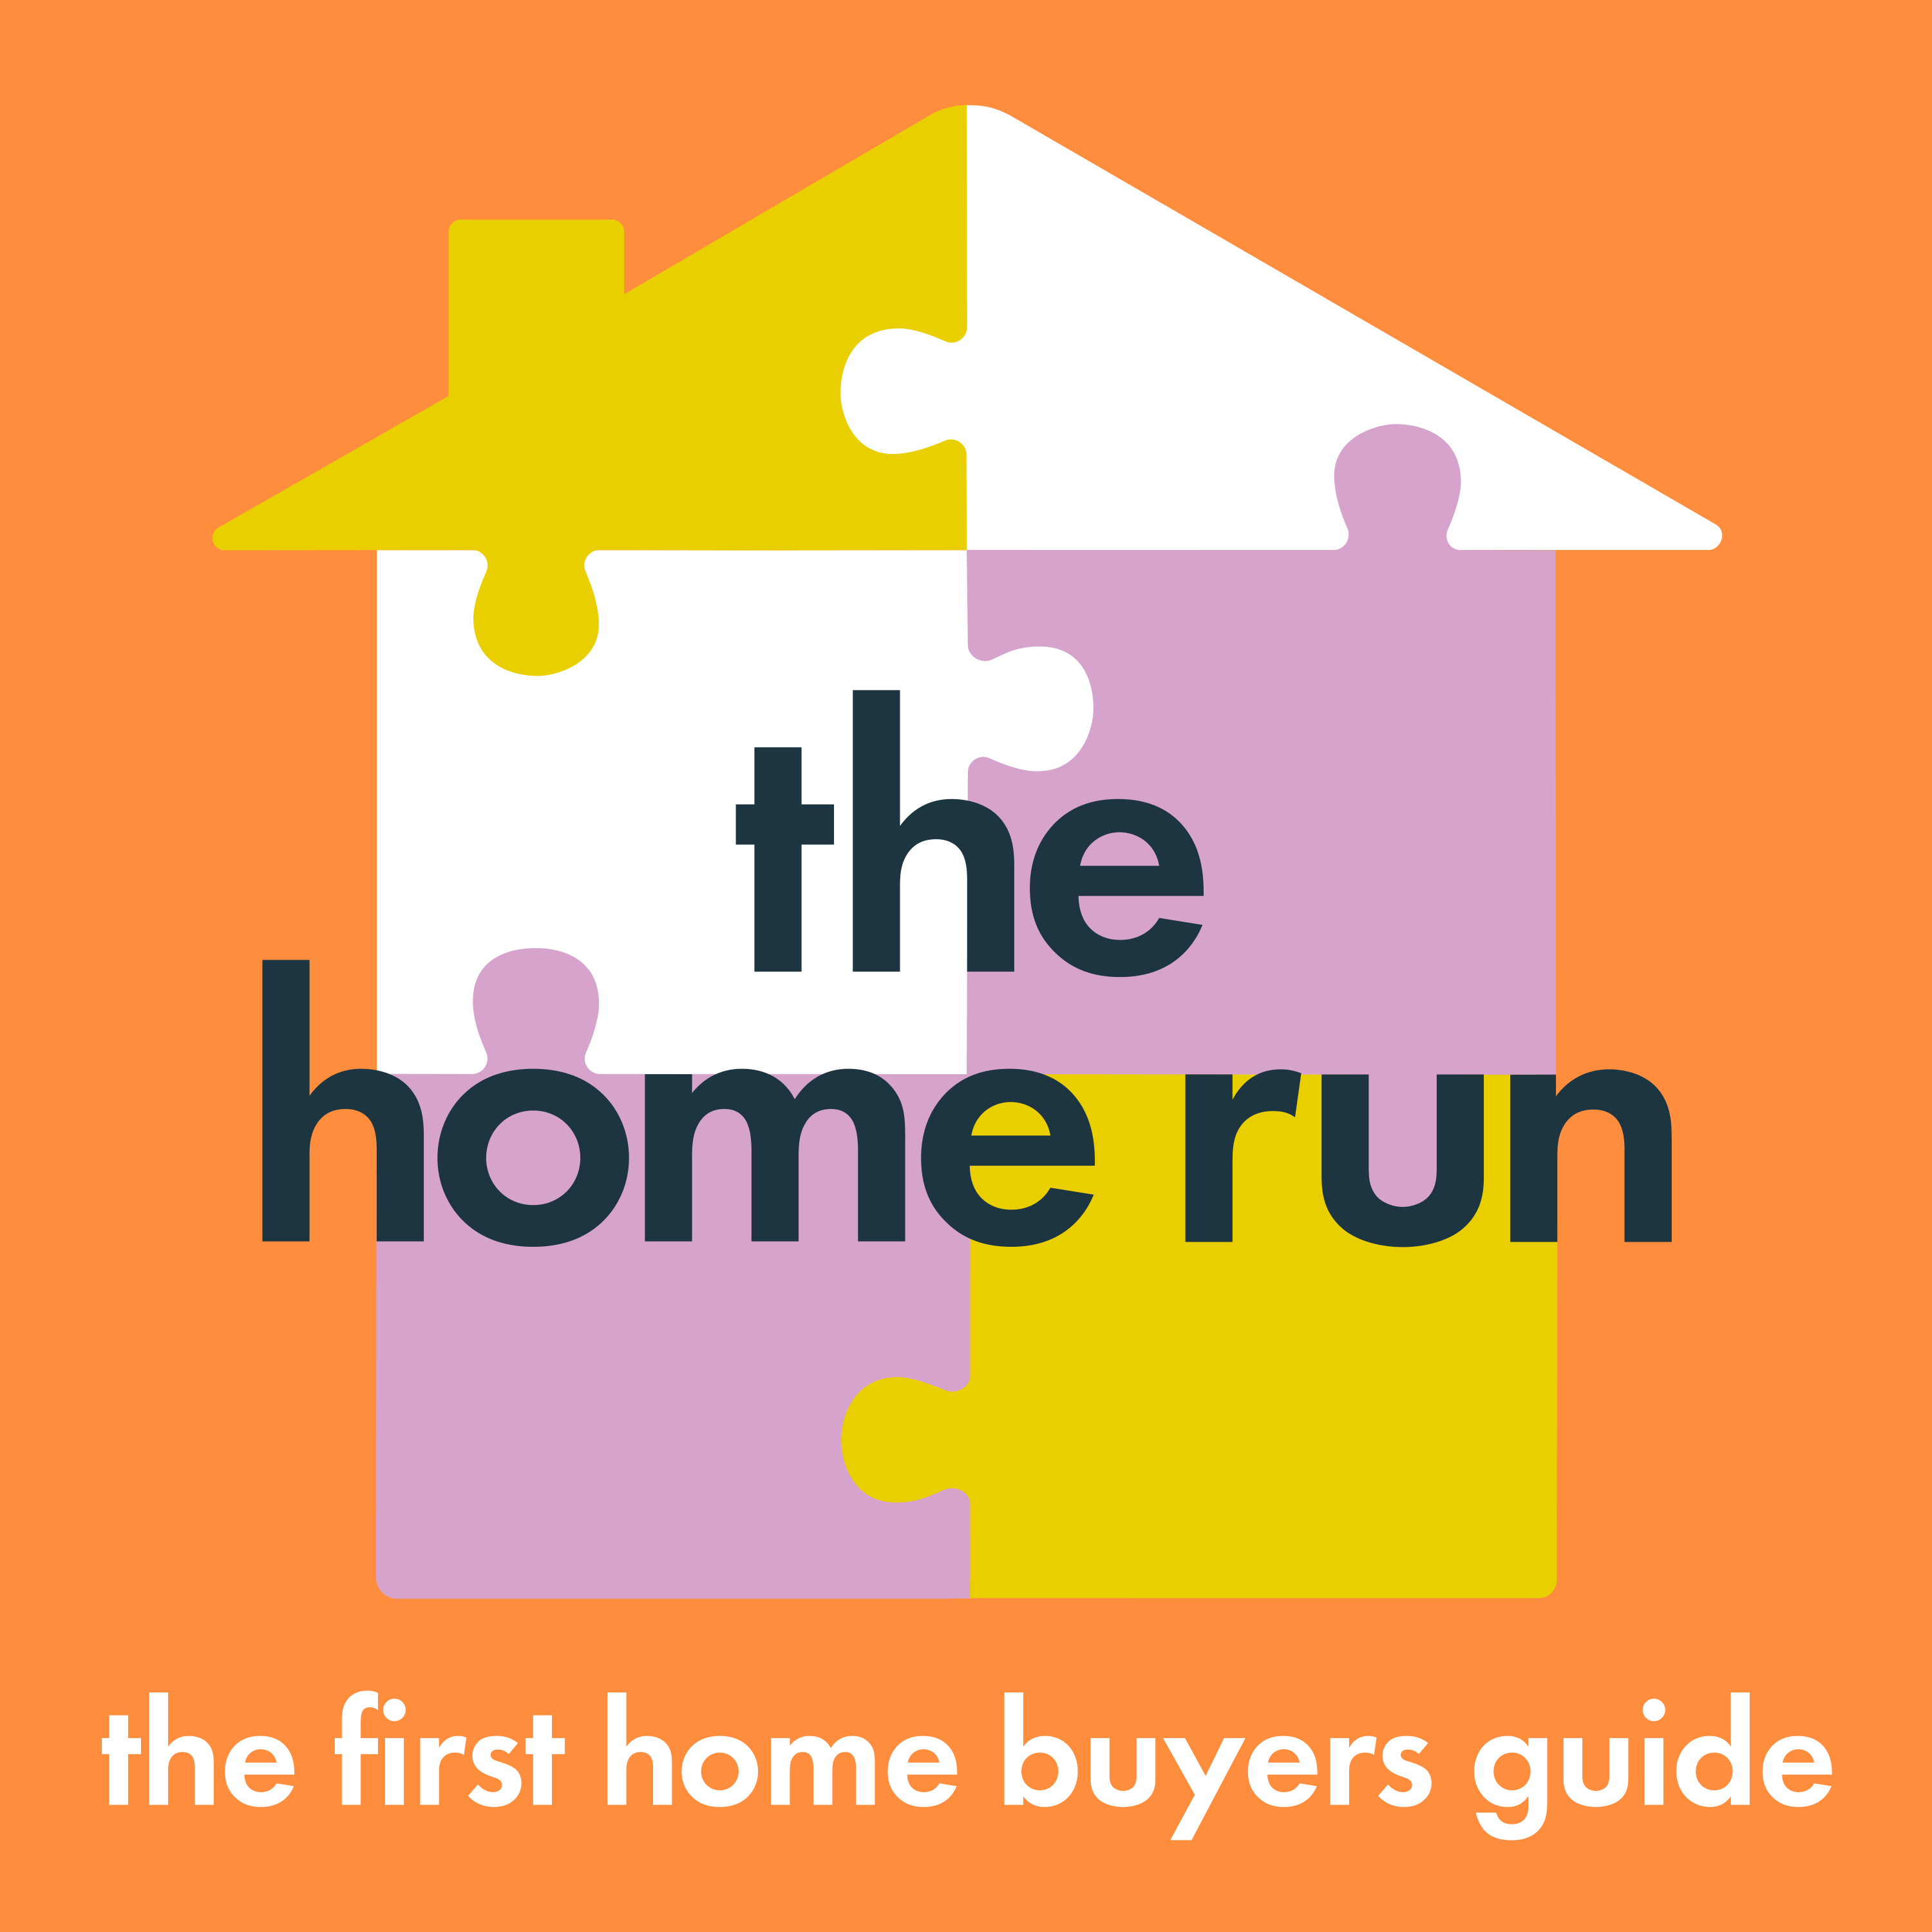 The statistics that could help you buy a house